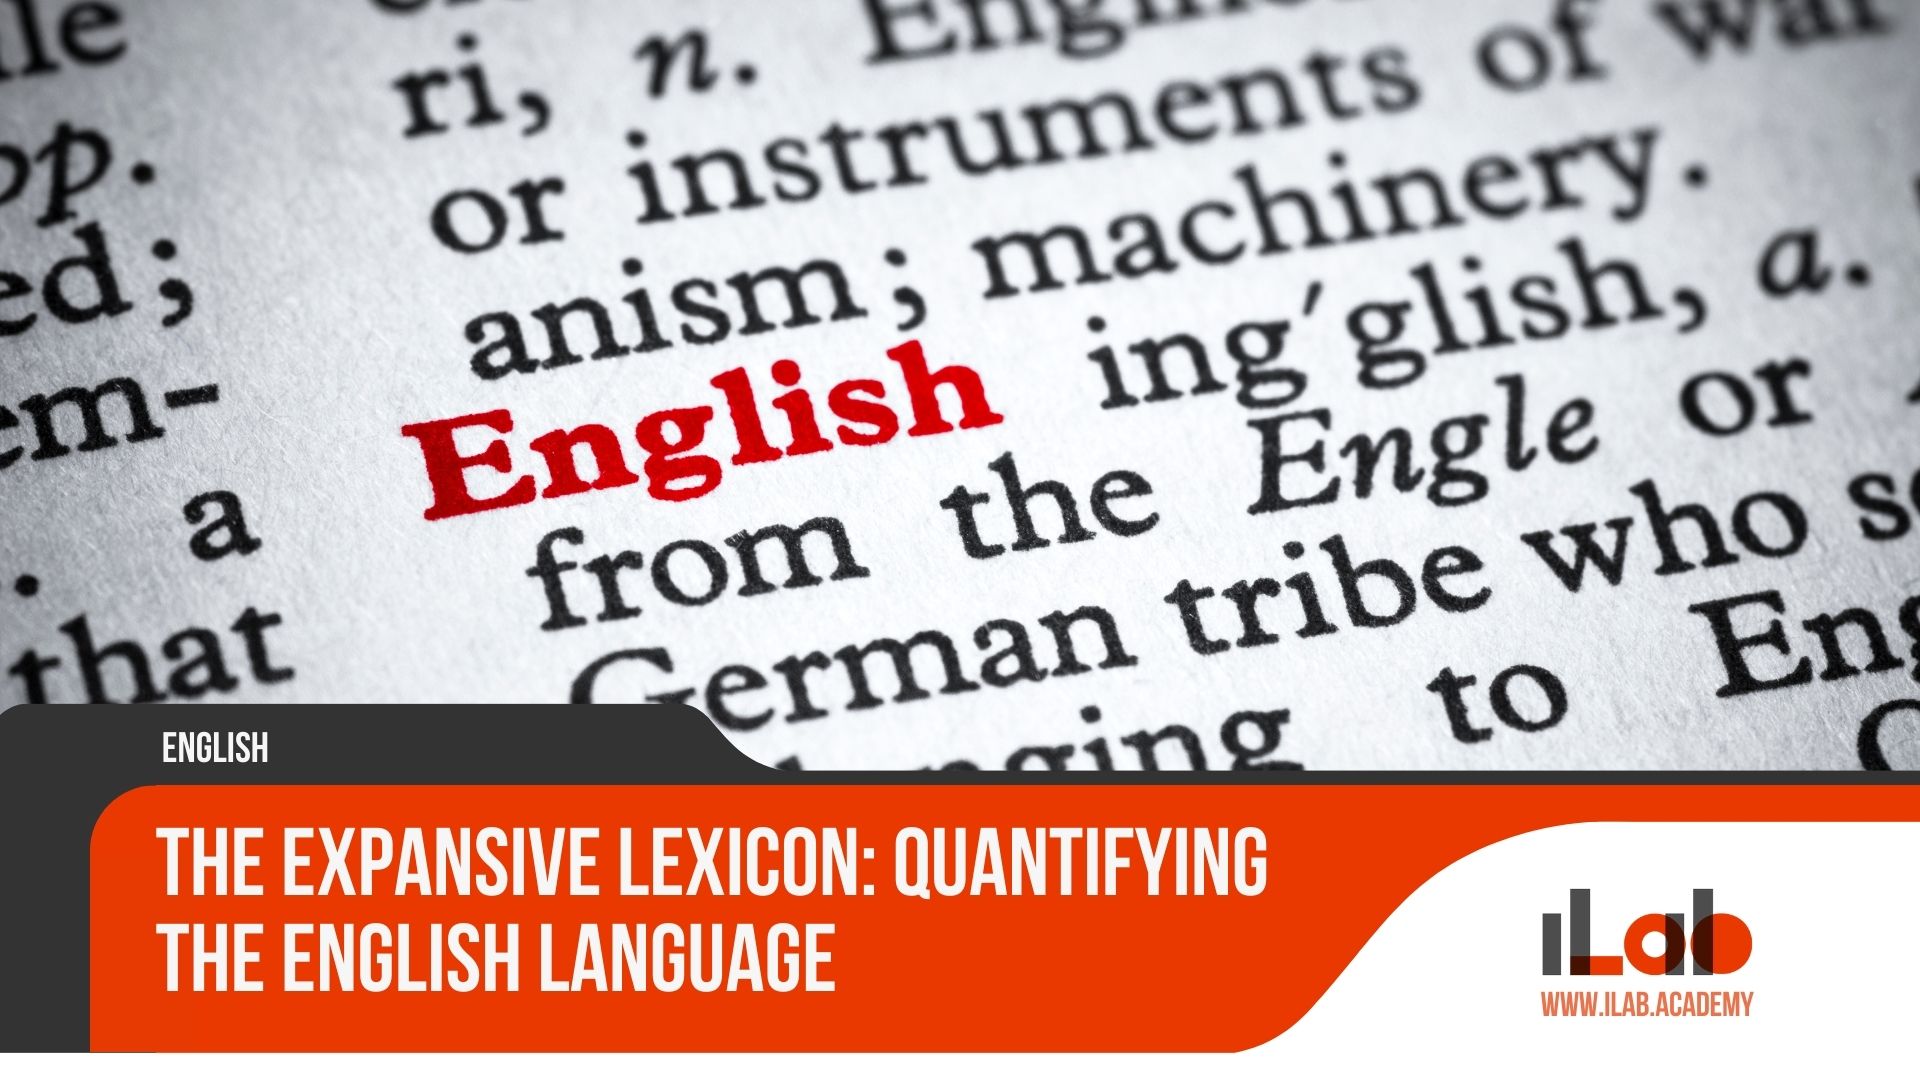 The Expansive Lexicon: Quantifying the English Language